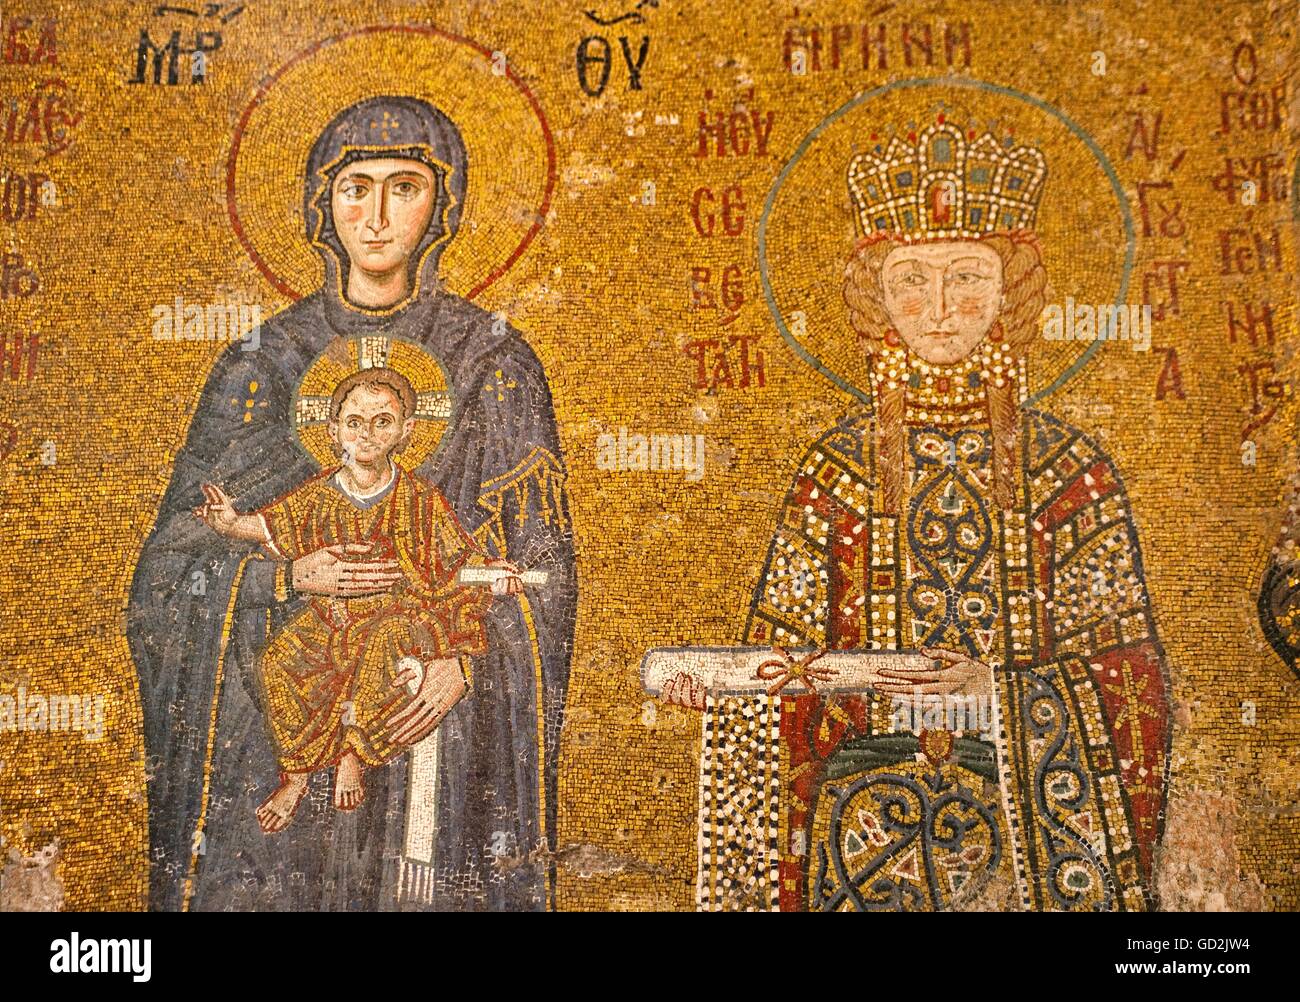 fine arts, religious art, mosaic, Saint Mary with Empress Irene, Hagia Sophia, Istanbul, Artist's Copyright has not to be cleared Stock Photo